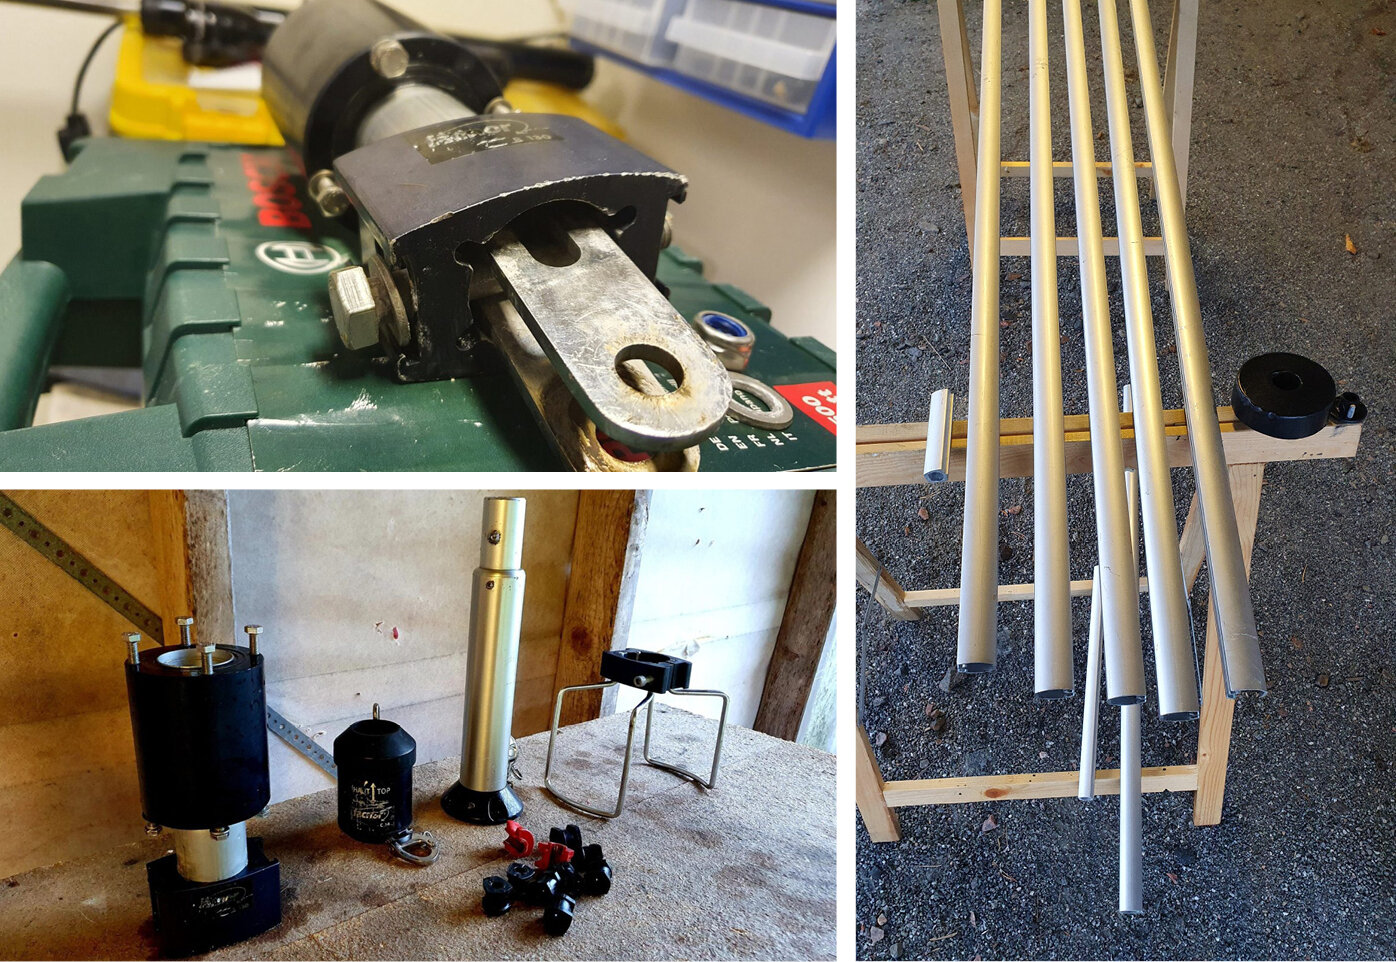 Here are all the parts that made up the furler Federico took off VELOCE. Together, they came to 10 kgs, and all that weight was in the wrong place, on the bow and up high.